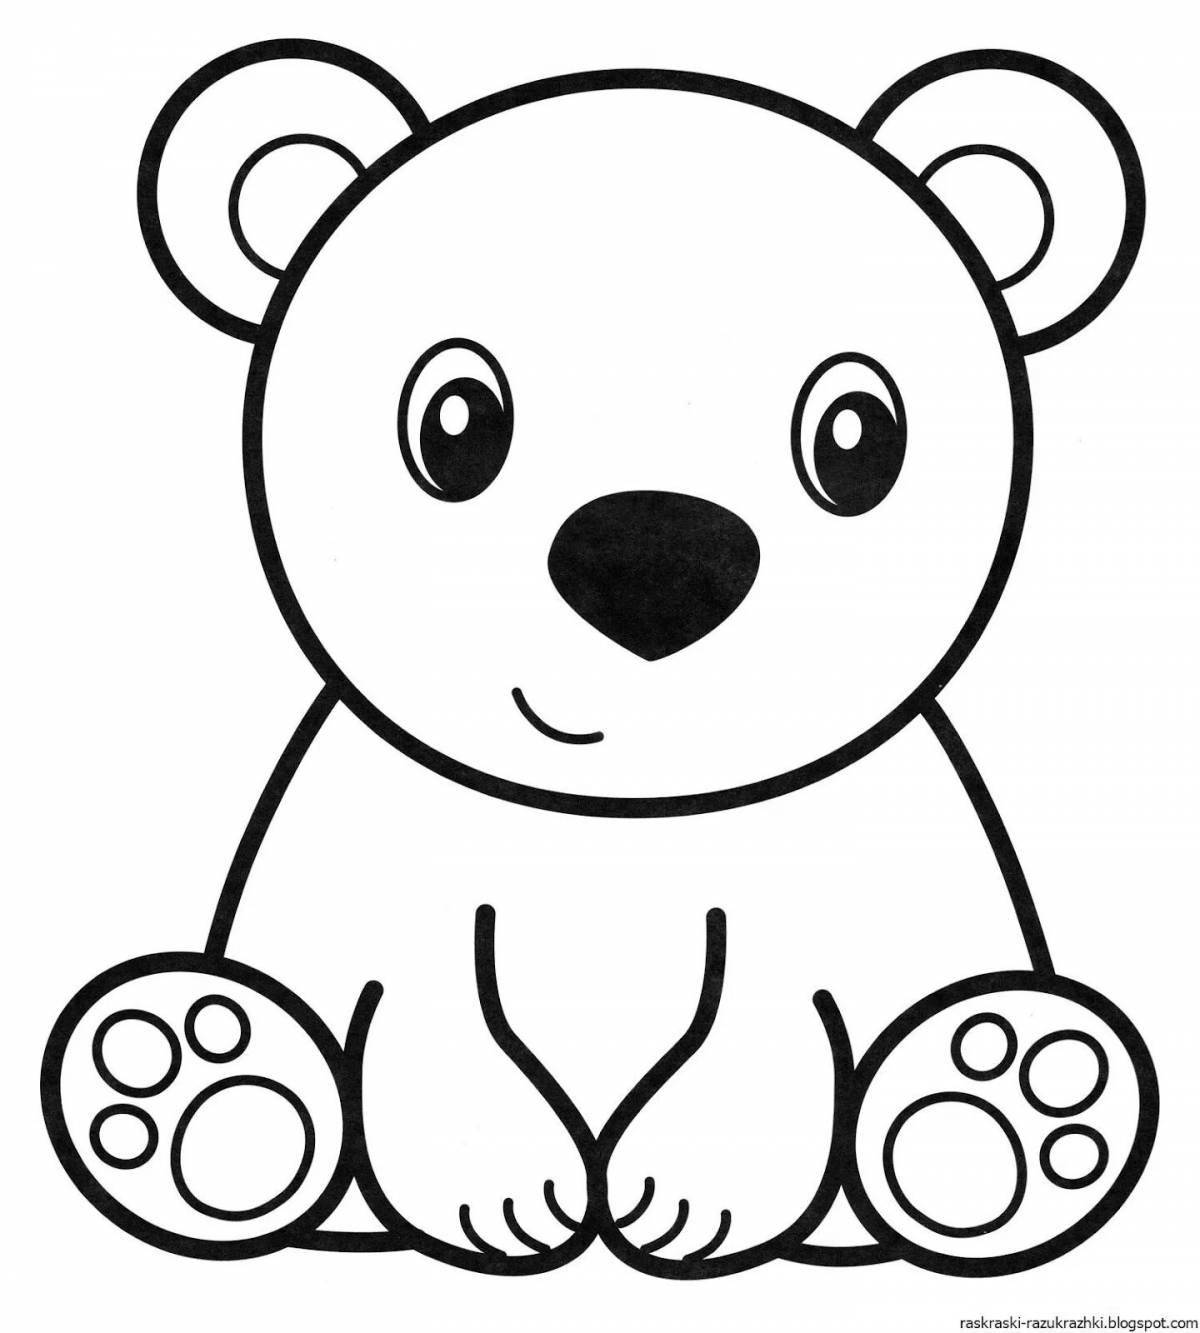 Cute bear coloring book for kids 5-6 years old